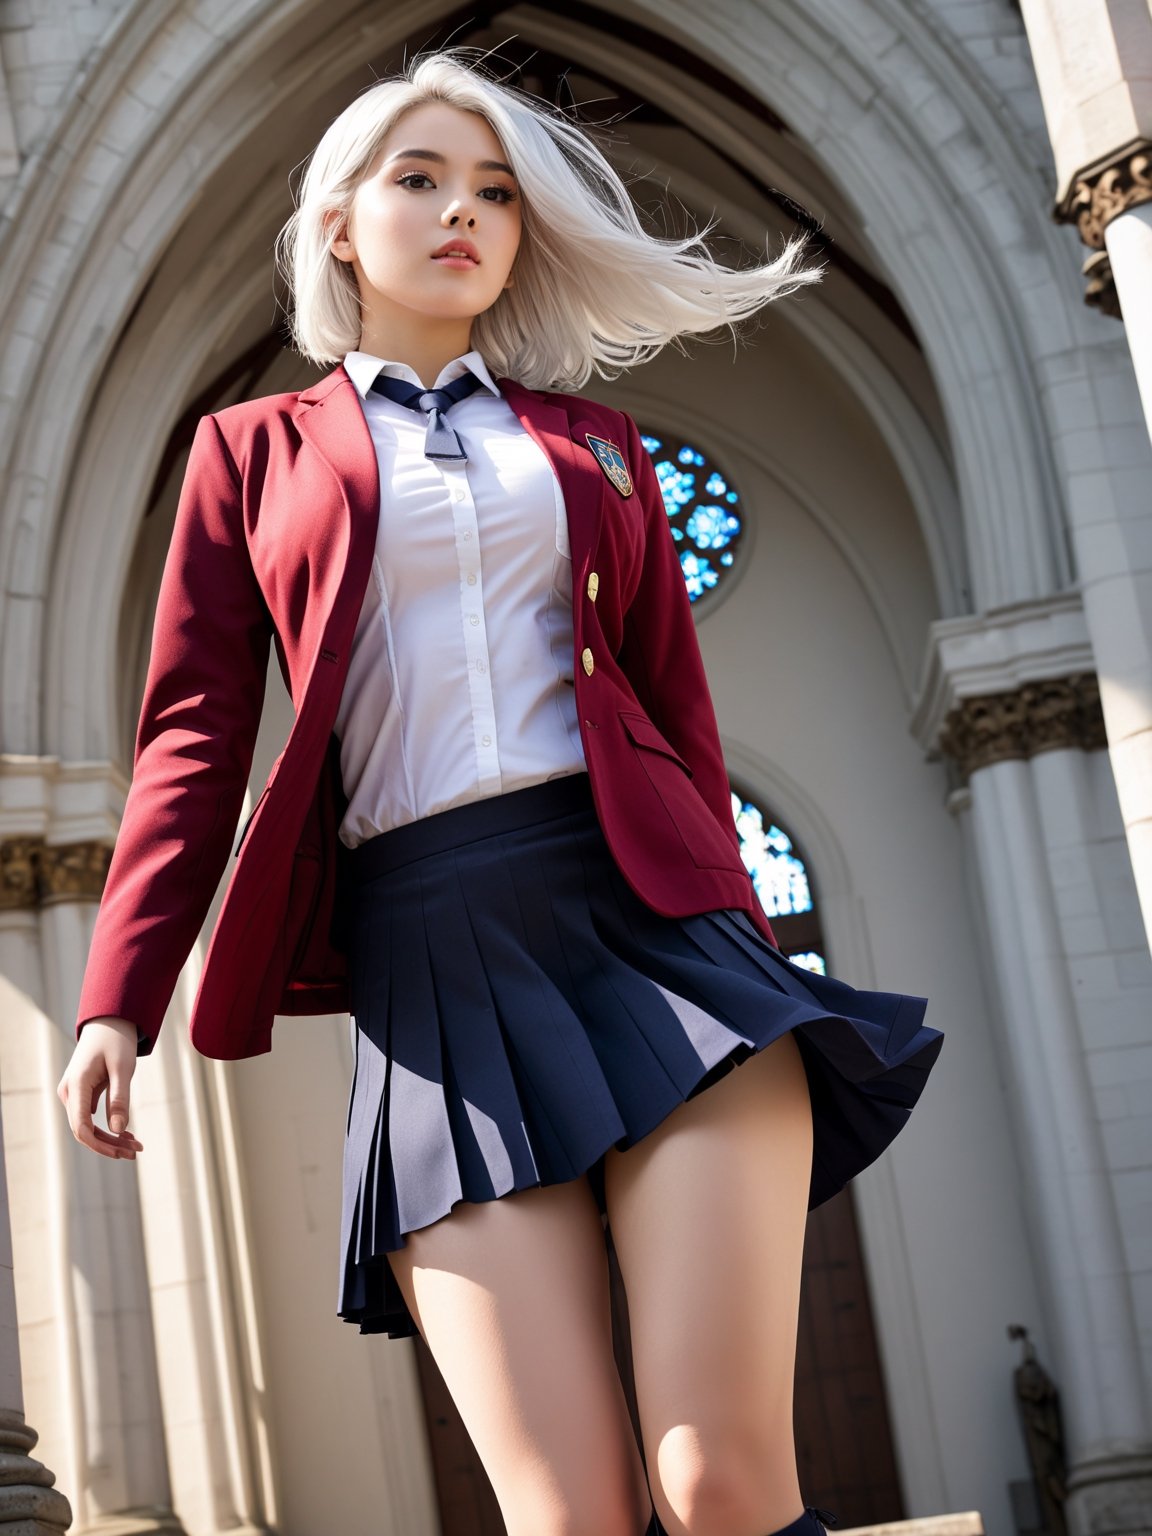 extream low angle,//Character, solo, 1girl, white hair, purple eyes,
//Fashion, school uniform, red jacket, Japhan girl,pleated skirt,detail face,chubby,large breast,red hair,flying fair,expose boots,
//Background, simple church outside background, 
//Quality, (masterpiece), best quality, ultra-high resolution, ultra-high definition, highres, intricate, intricate details, absurdres, highly detailed, finely detailed, ultra-detailed, ultra-high texture quality, natural lighting, natural shadow, dramatic shading, dramatic lighting, vivid colour, perfect anatomy, 
